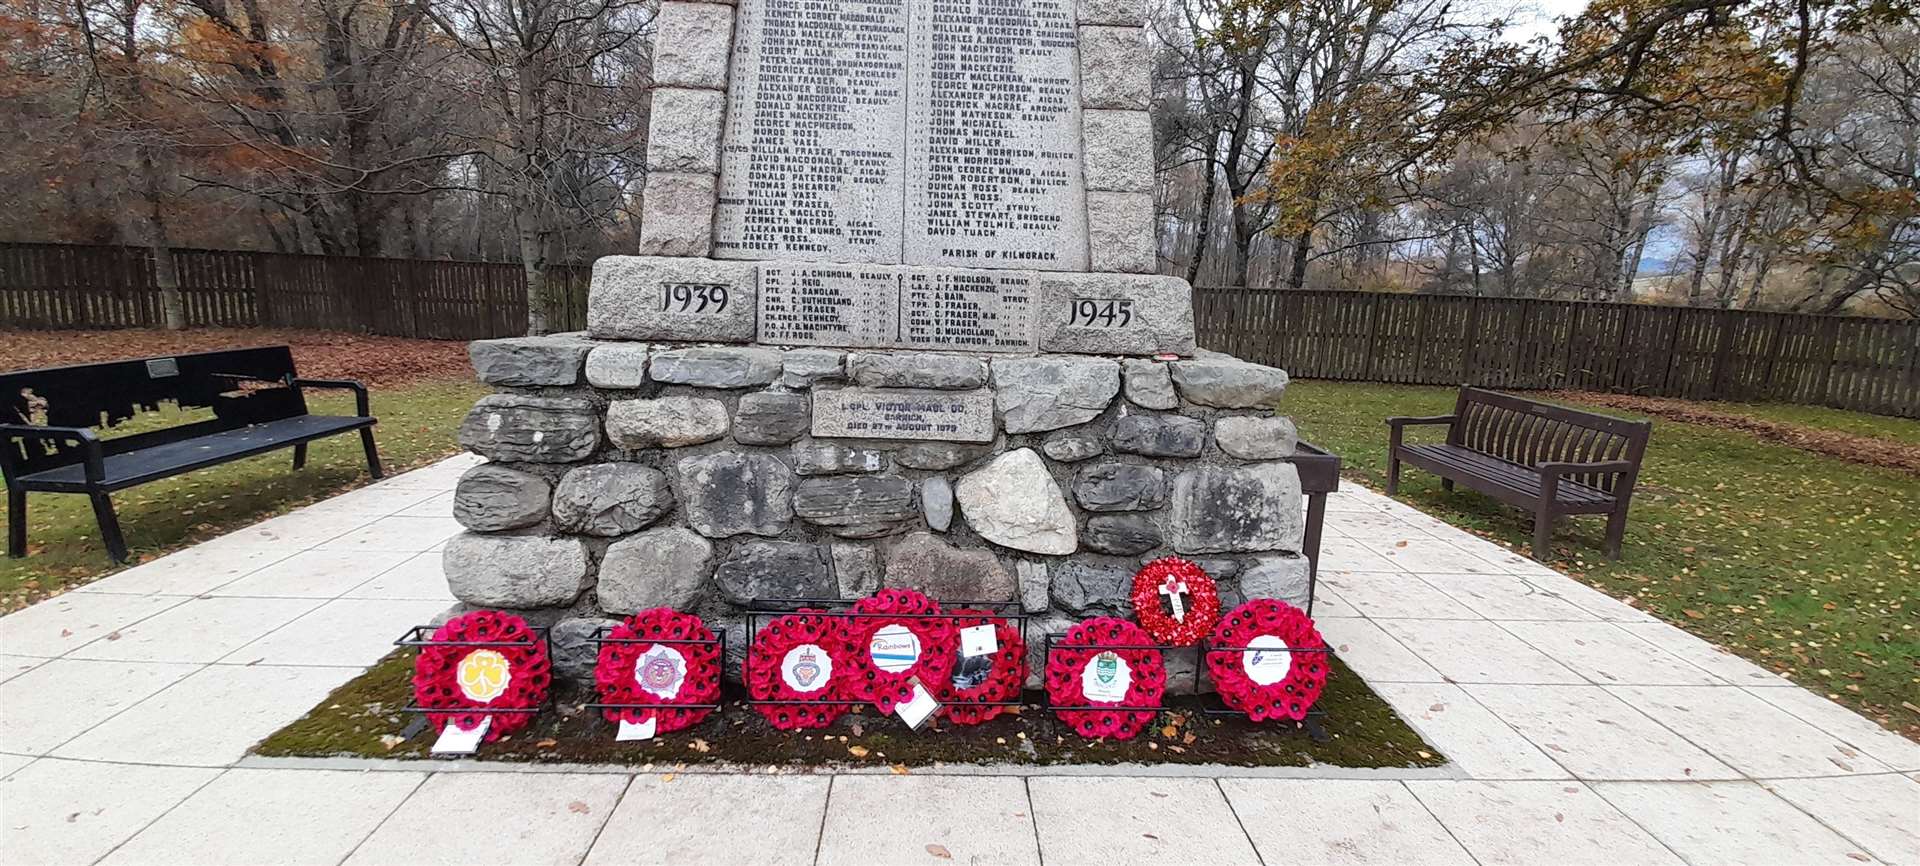 Those who have died in conflict are remembered at the war memorial at Beauly Toll.